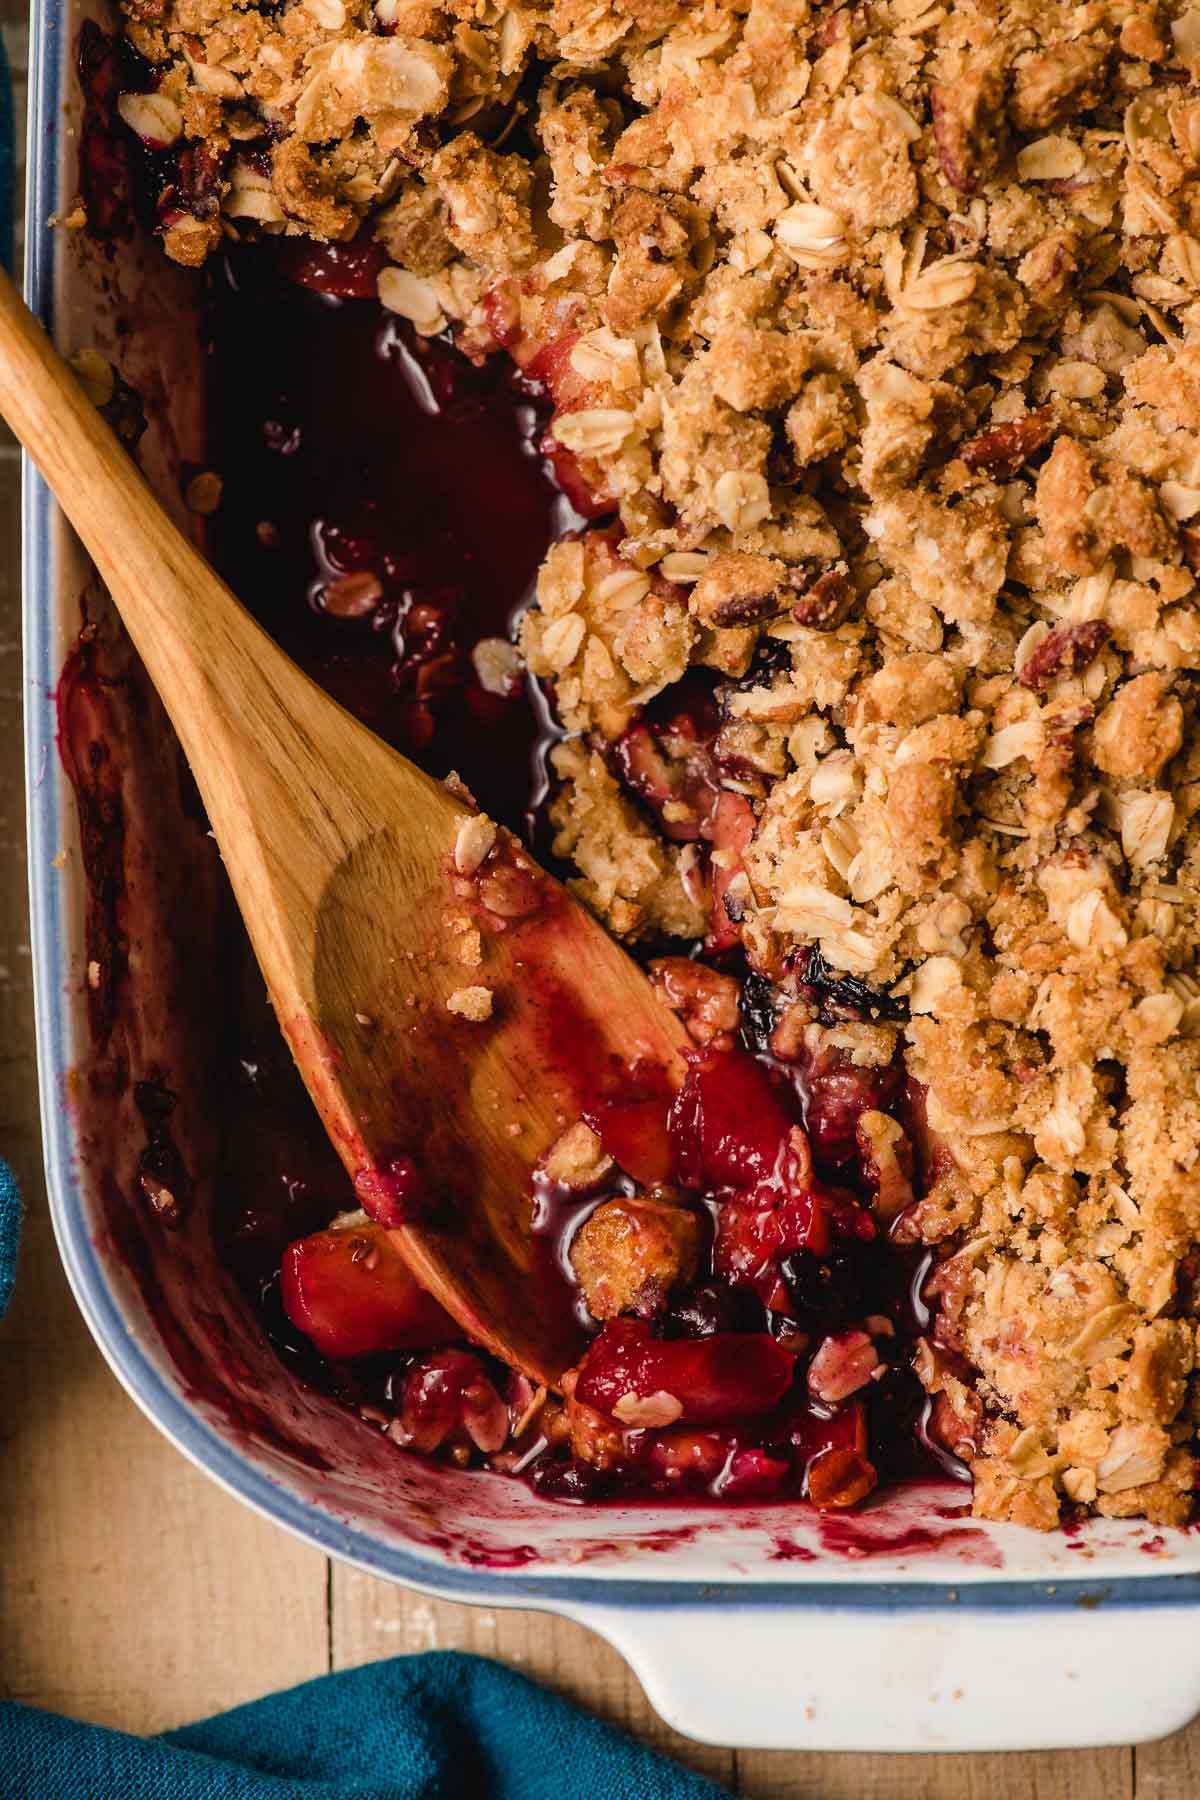 Rich, purple hued blueberry and world crumble shown in a sultry dish with a wooden spoon.